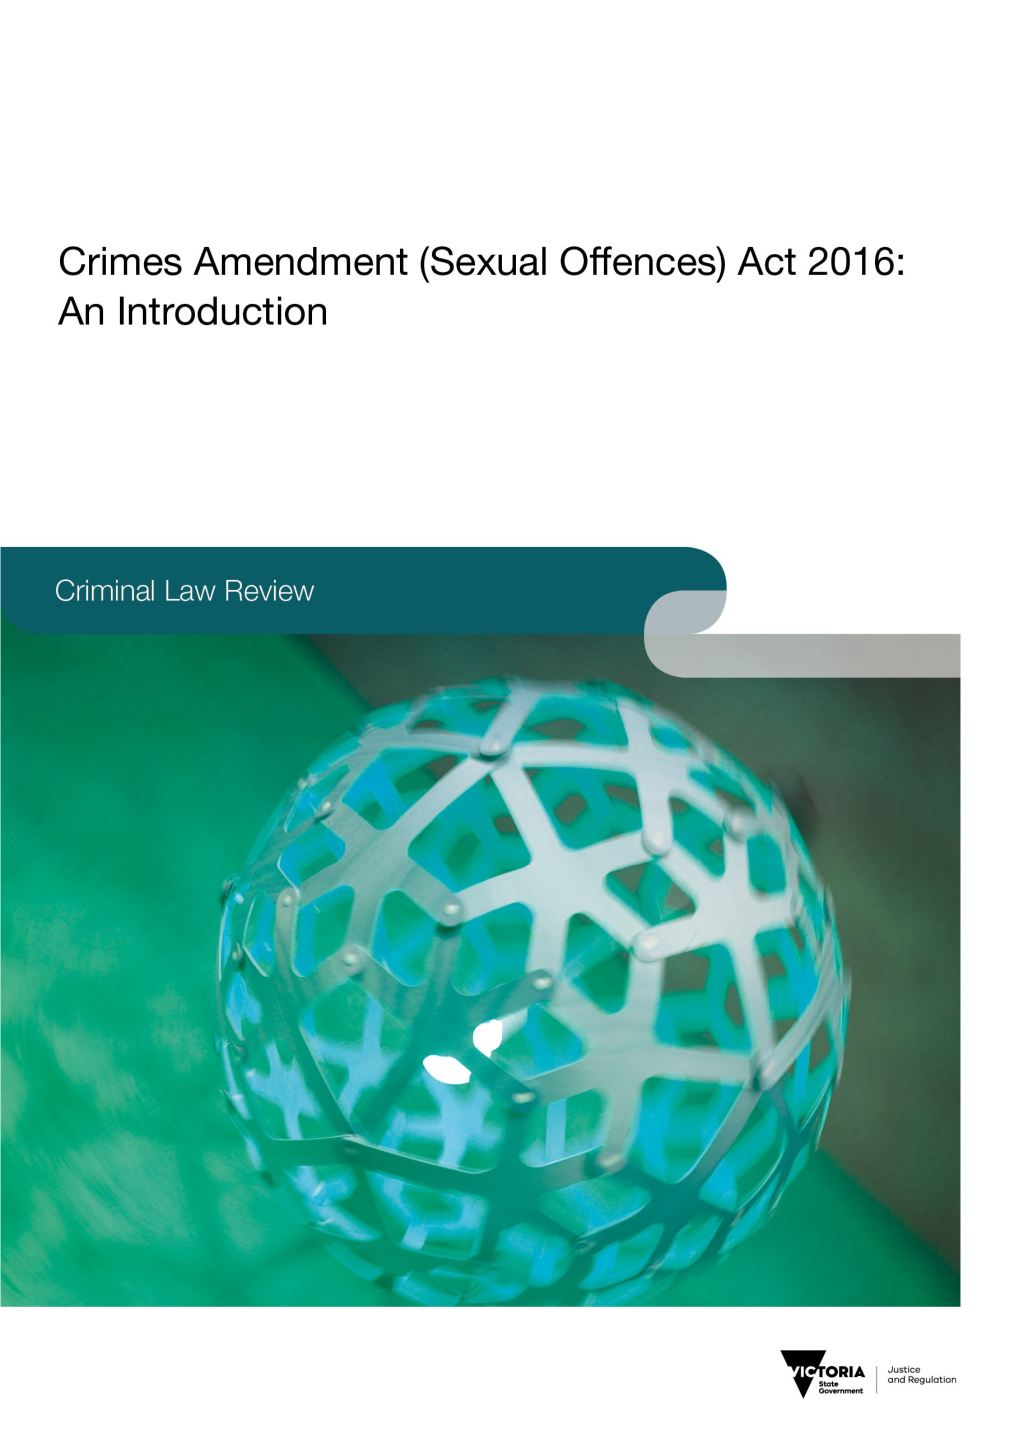 Report - Crimes Amendment (Sexual Offences) Act 2016 - an Introduction